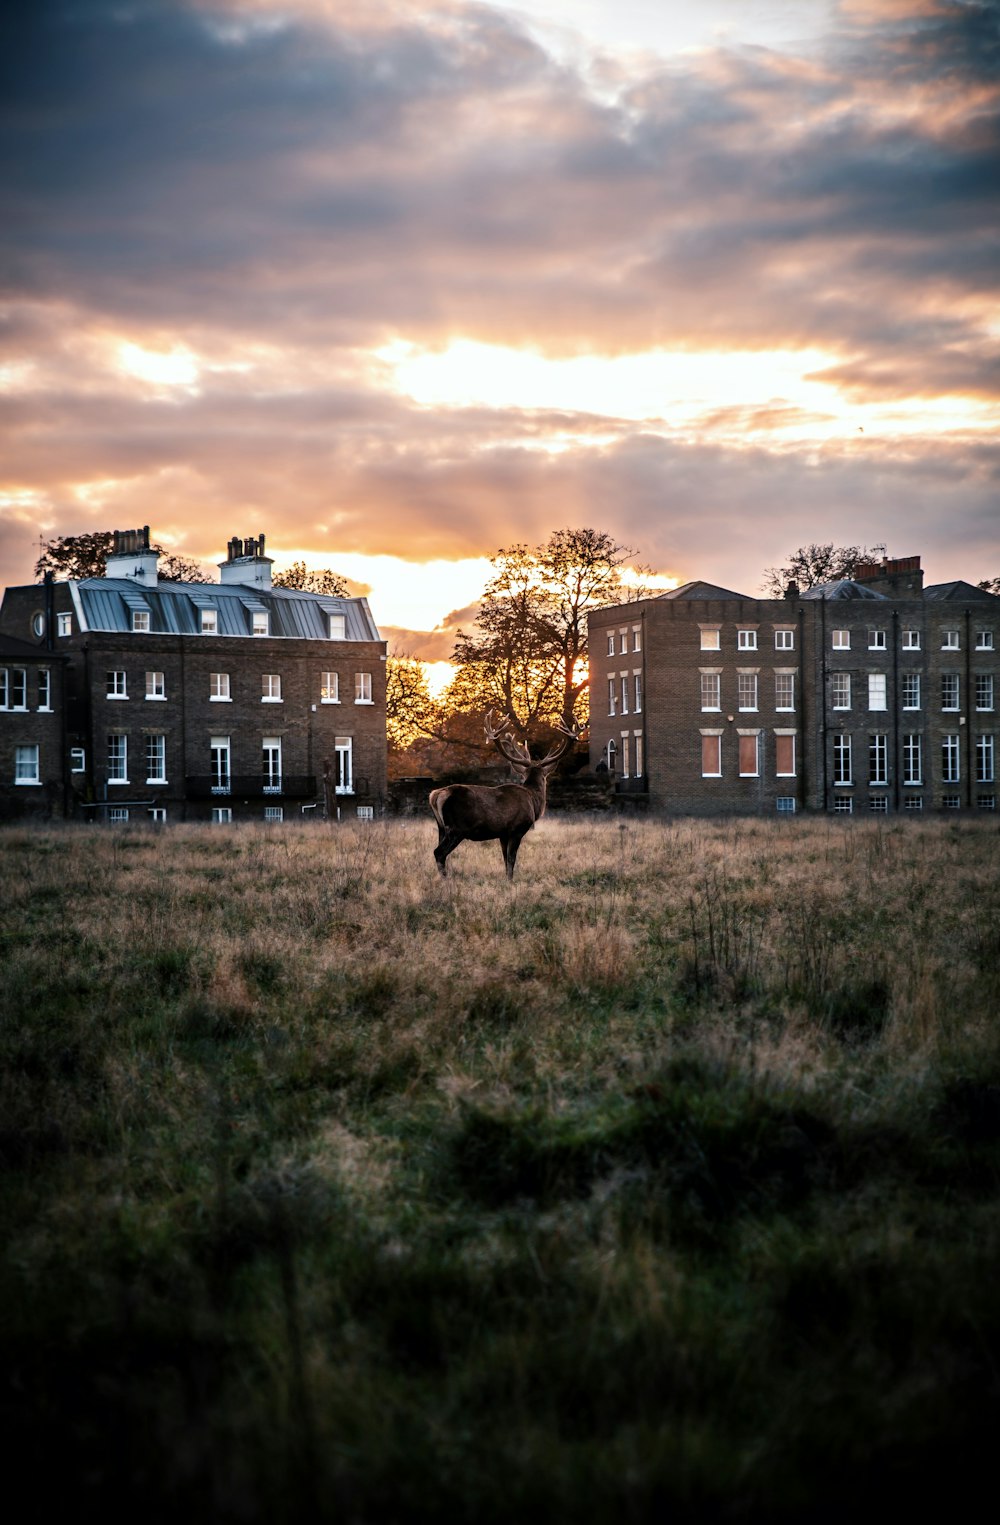 deer on grass field near buildings during day